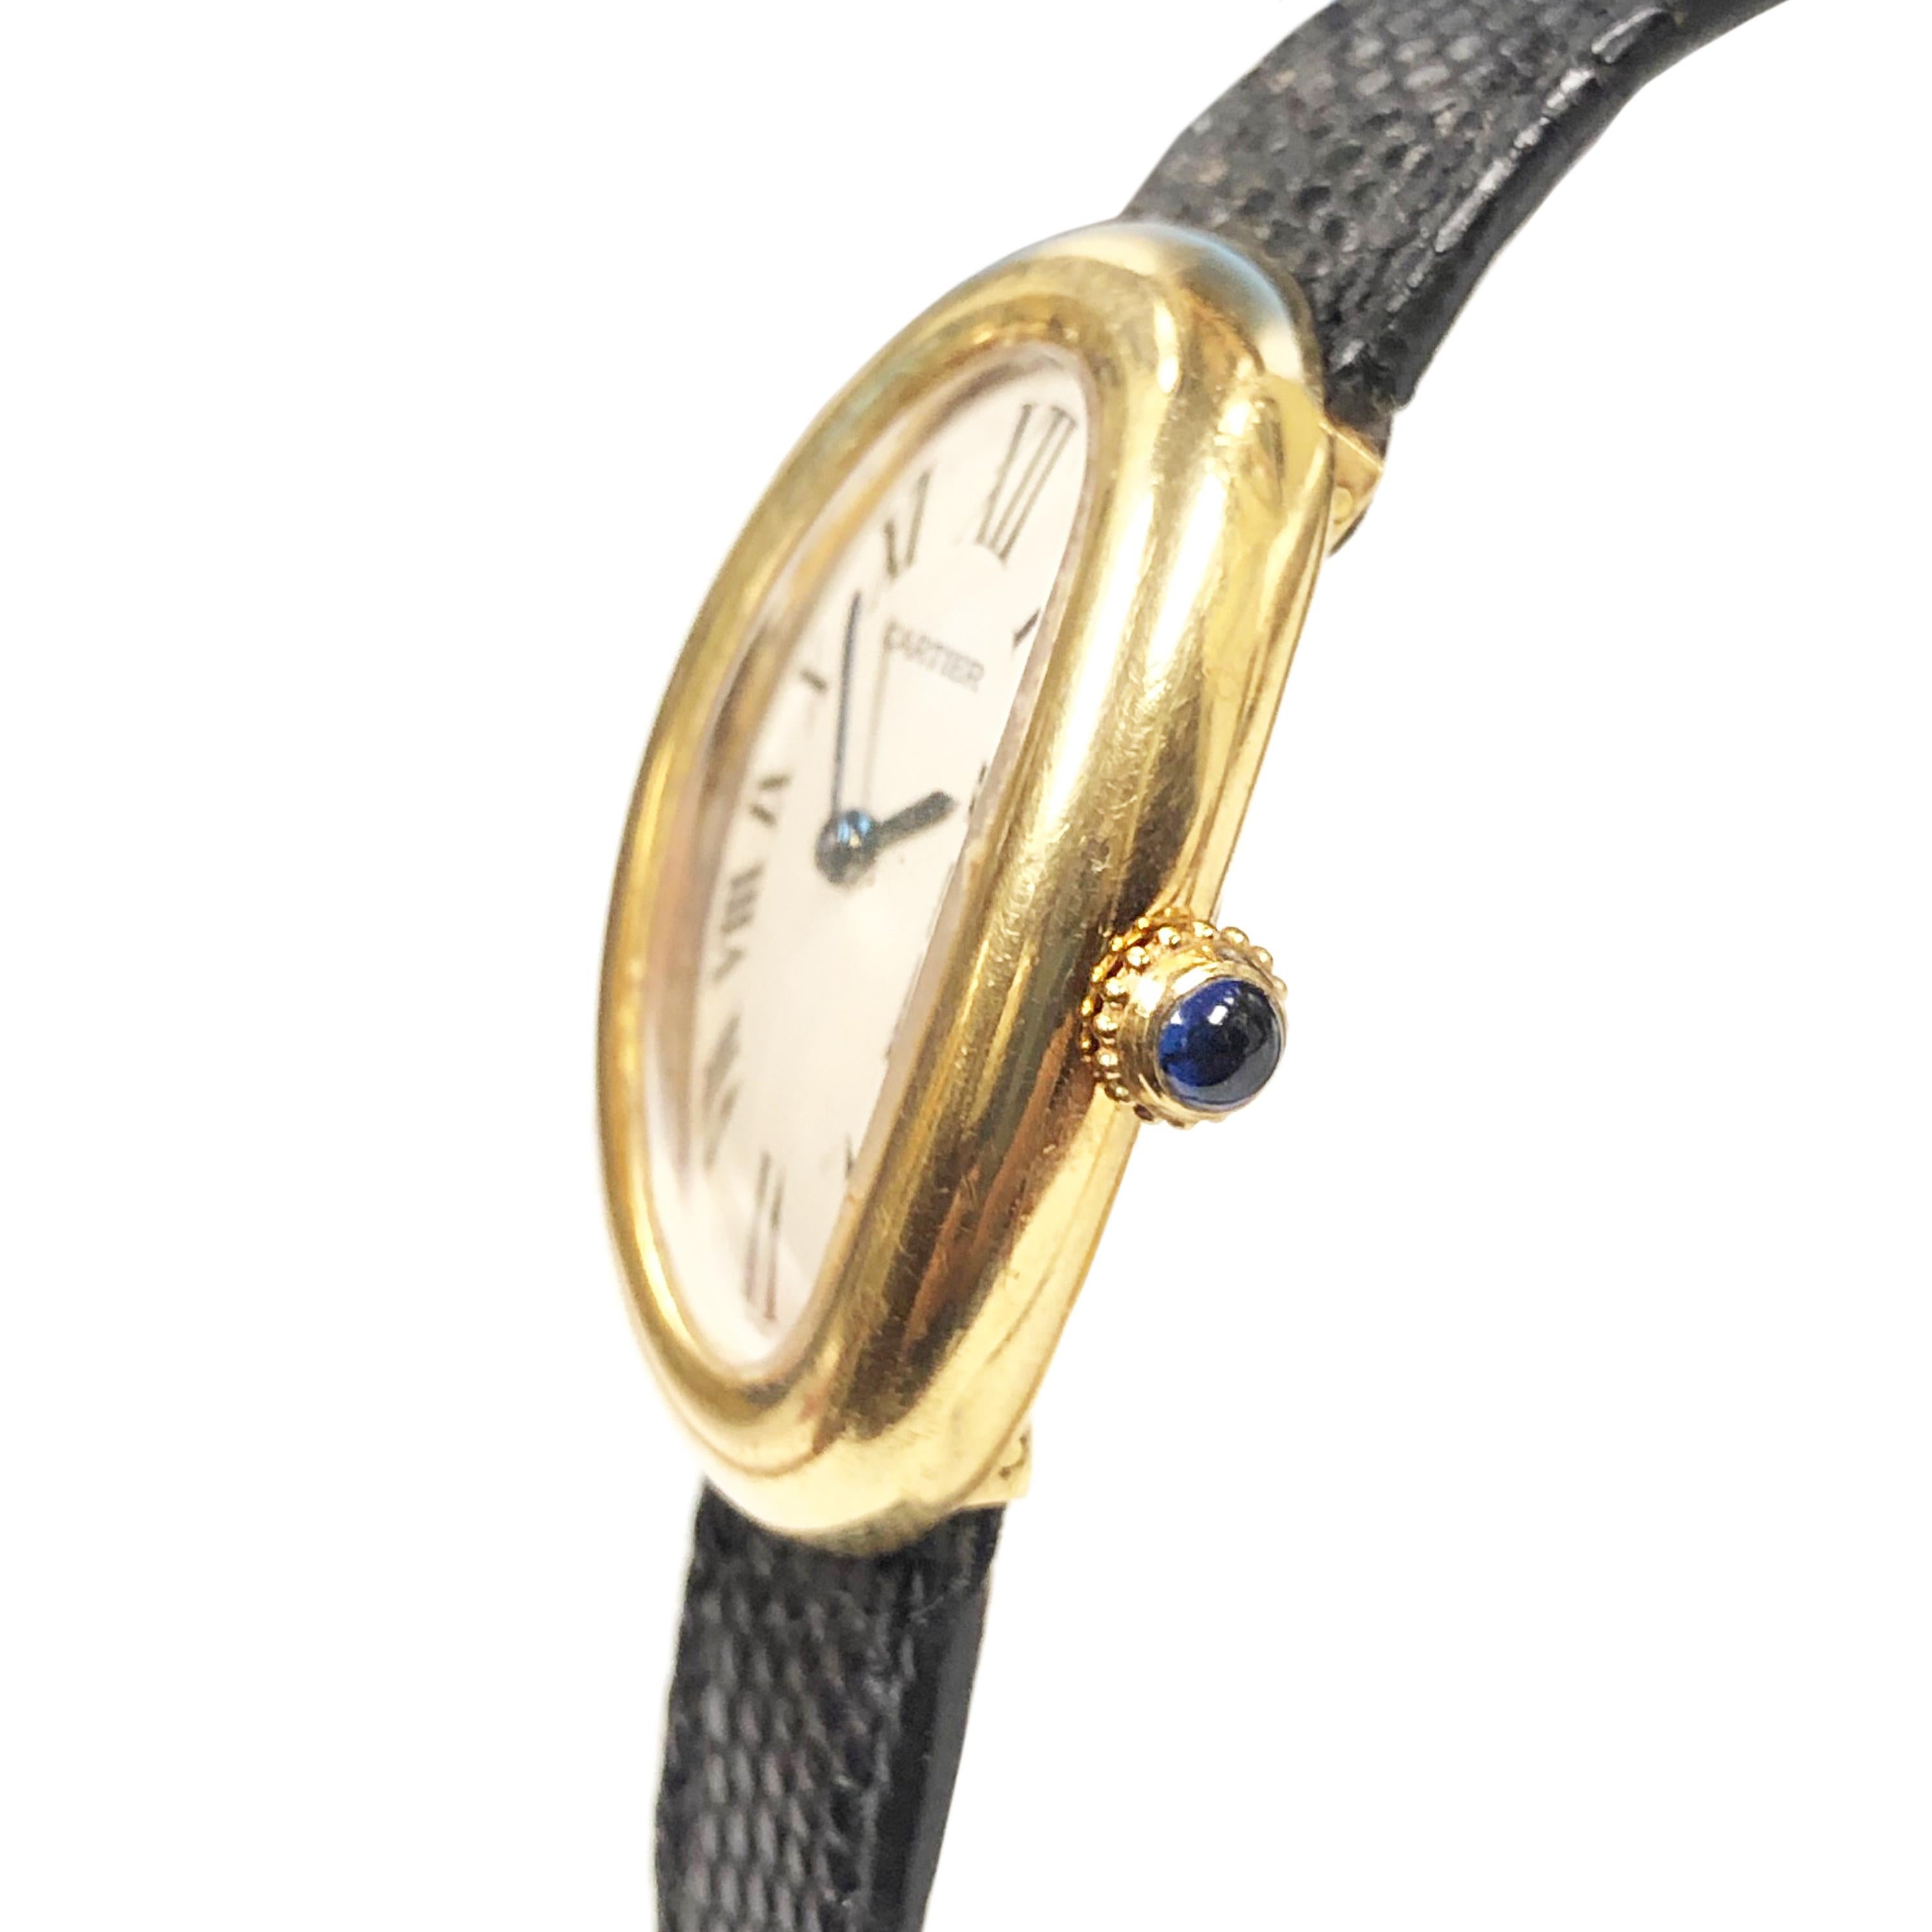 Circa 1980 Cartier Baignoire collection Wrist watch owned and worn by Hollywood Icon Jerry Lewis. 31 X 23 MM 18K Yellow Gold 2 Piece water resistant case. Quartz Movement, White dial with Black Roman numerals. Black Lizard Strap with Gold Plate